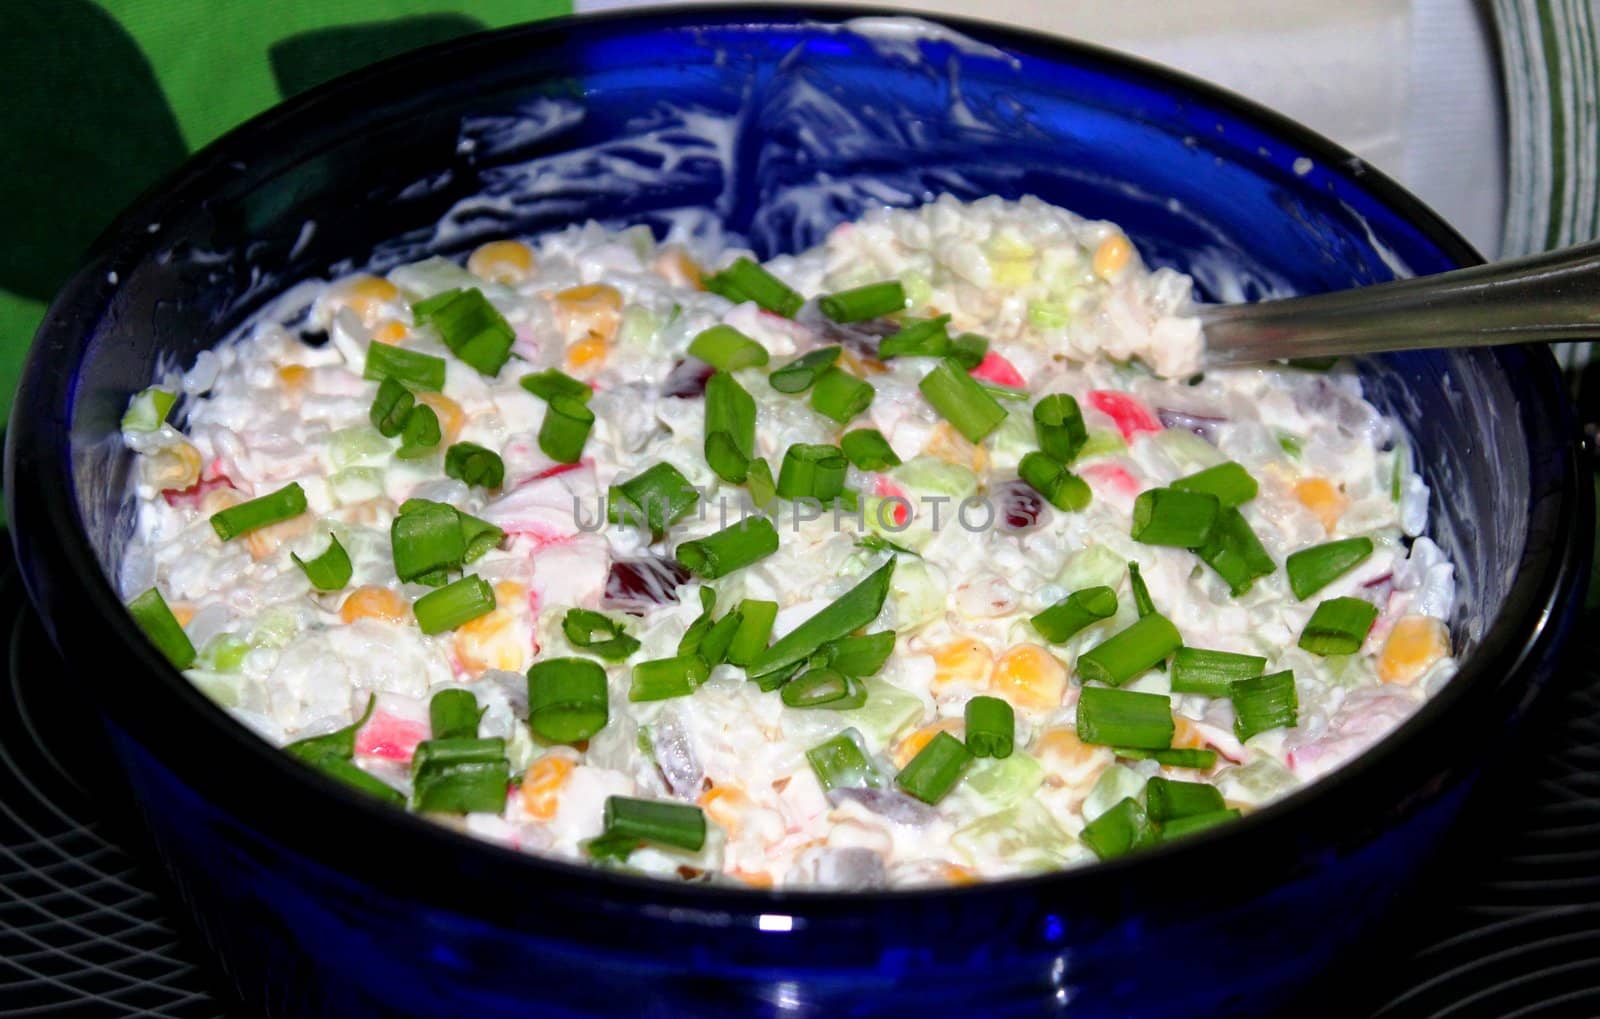 Crab Salad in Russian recipe by Metanna